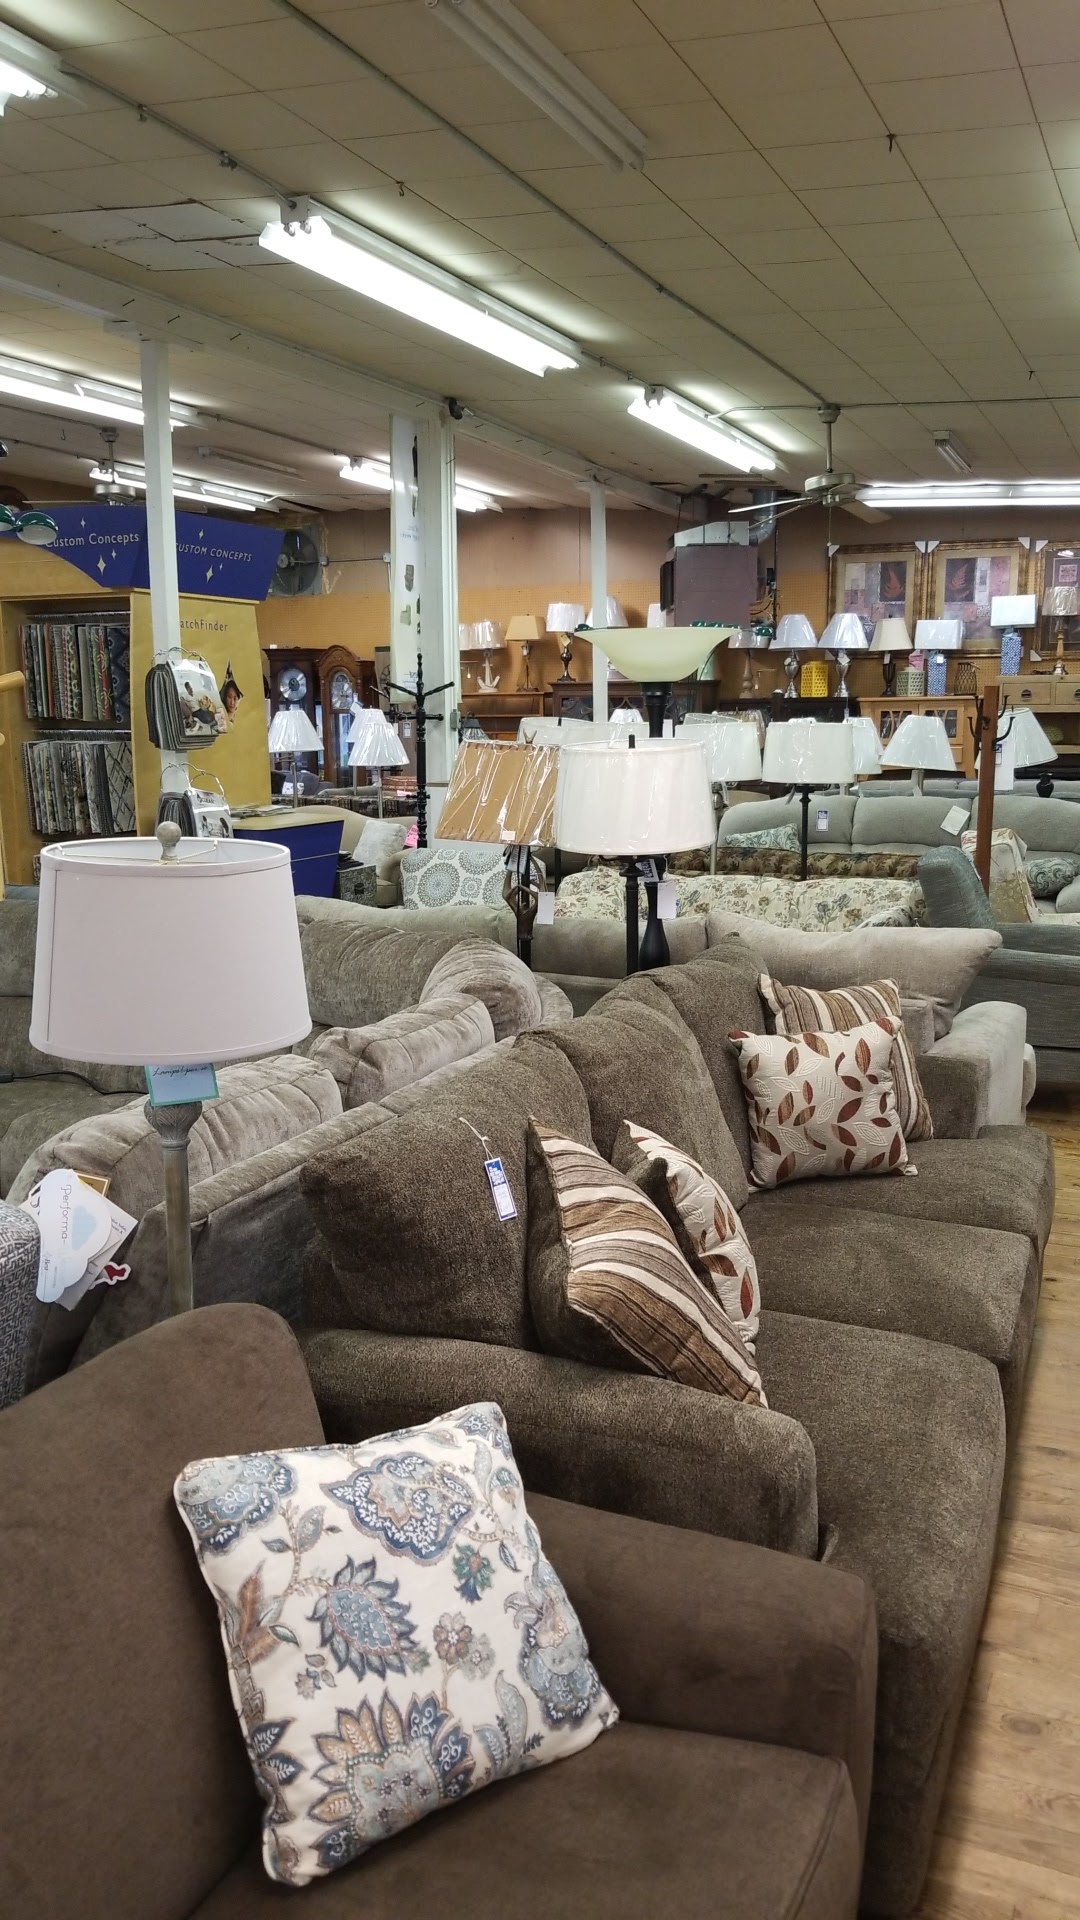 Kelly's Furniture Store